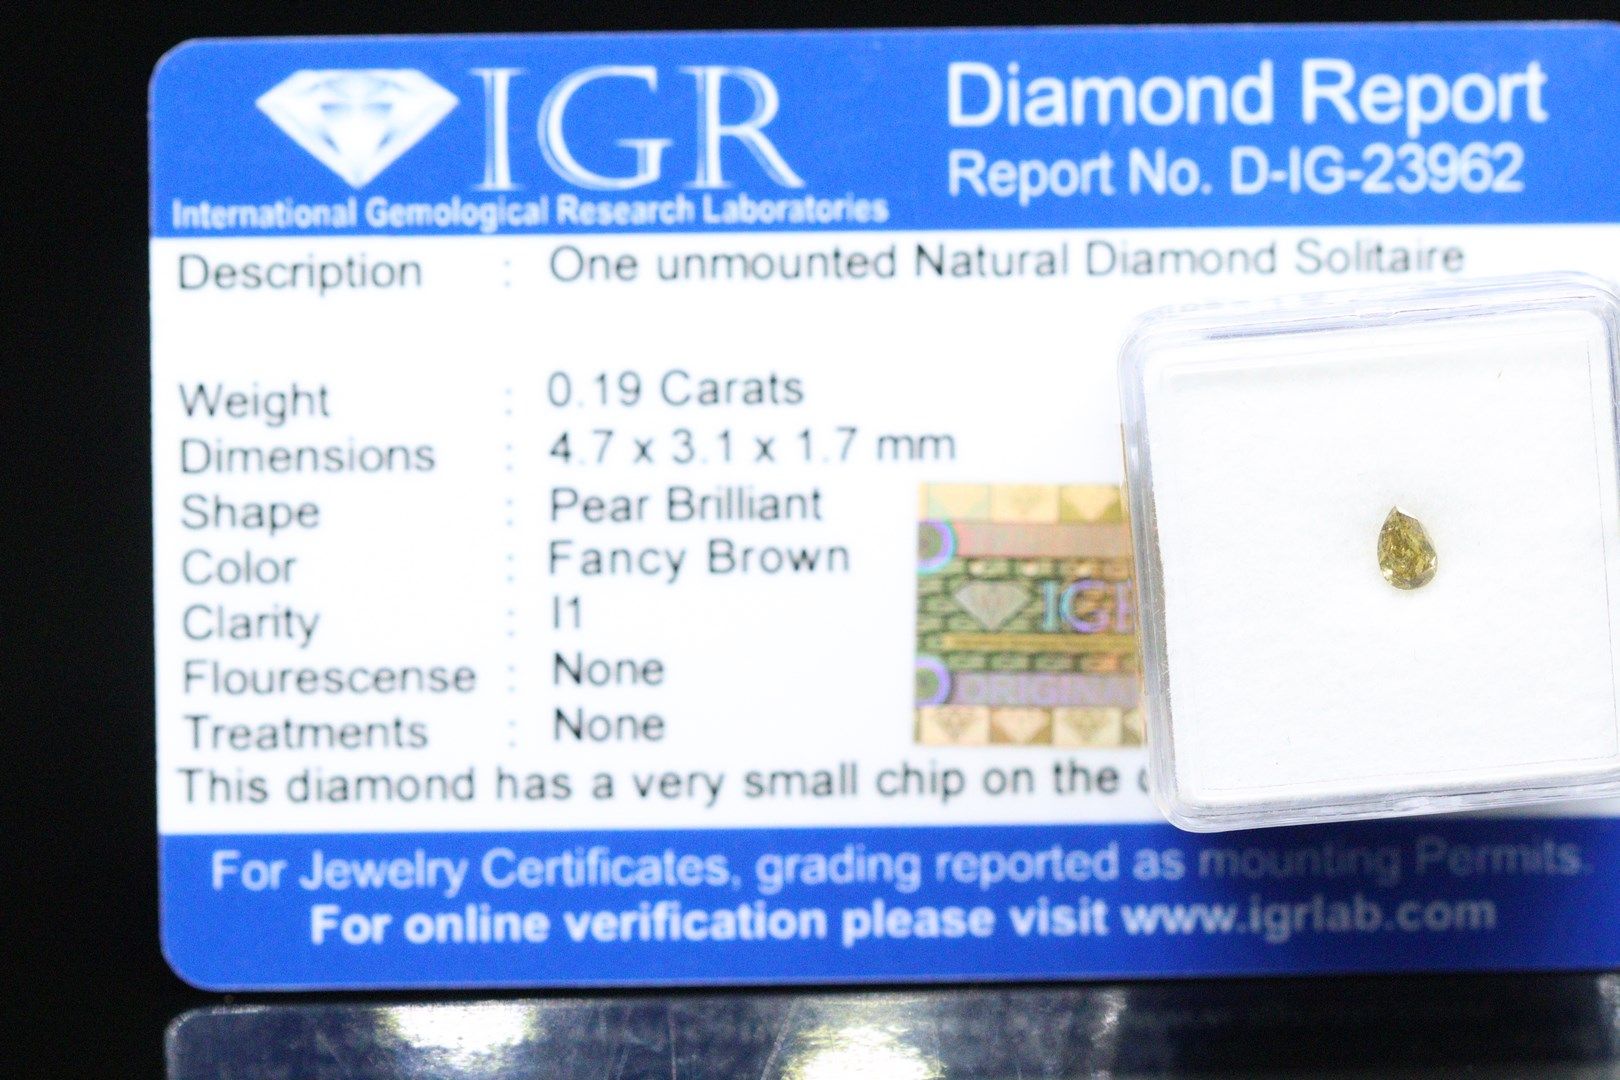 Null Fancy Brown" round diamond under seal.

Accompanied by a report of the IGR &hellip;